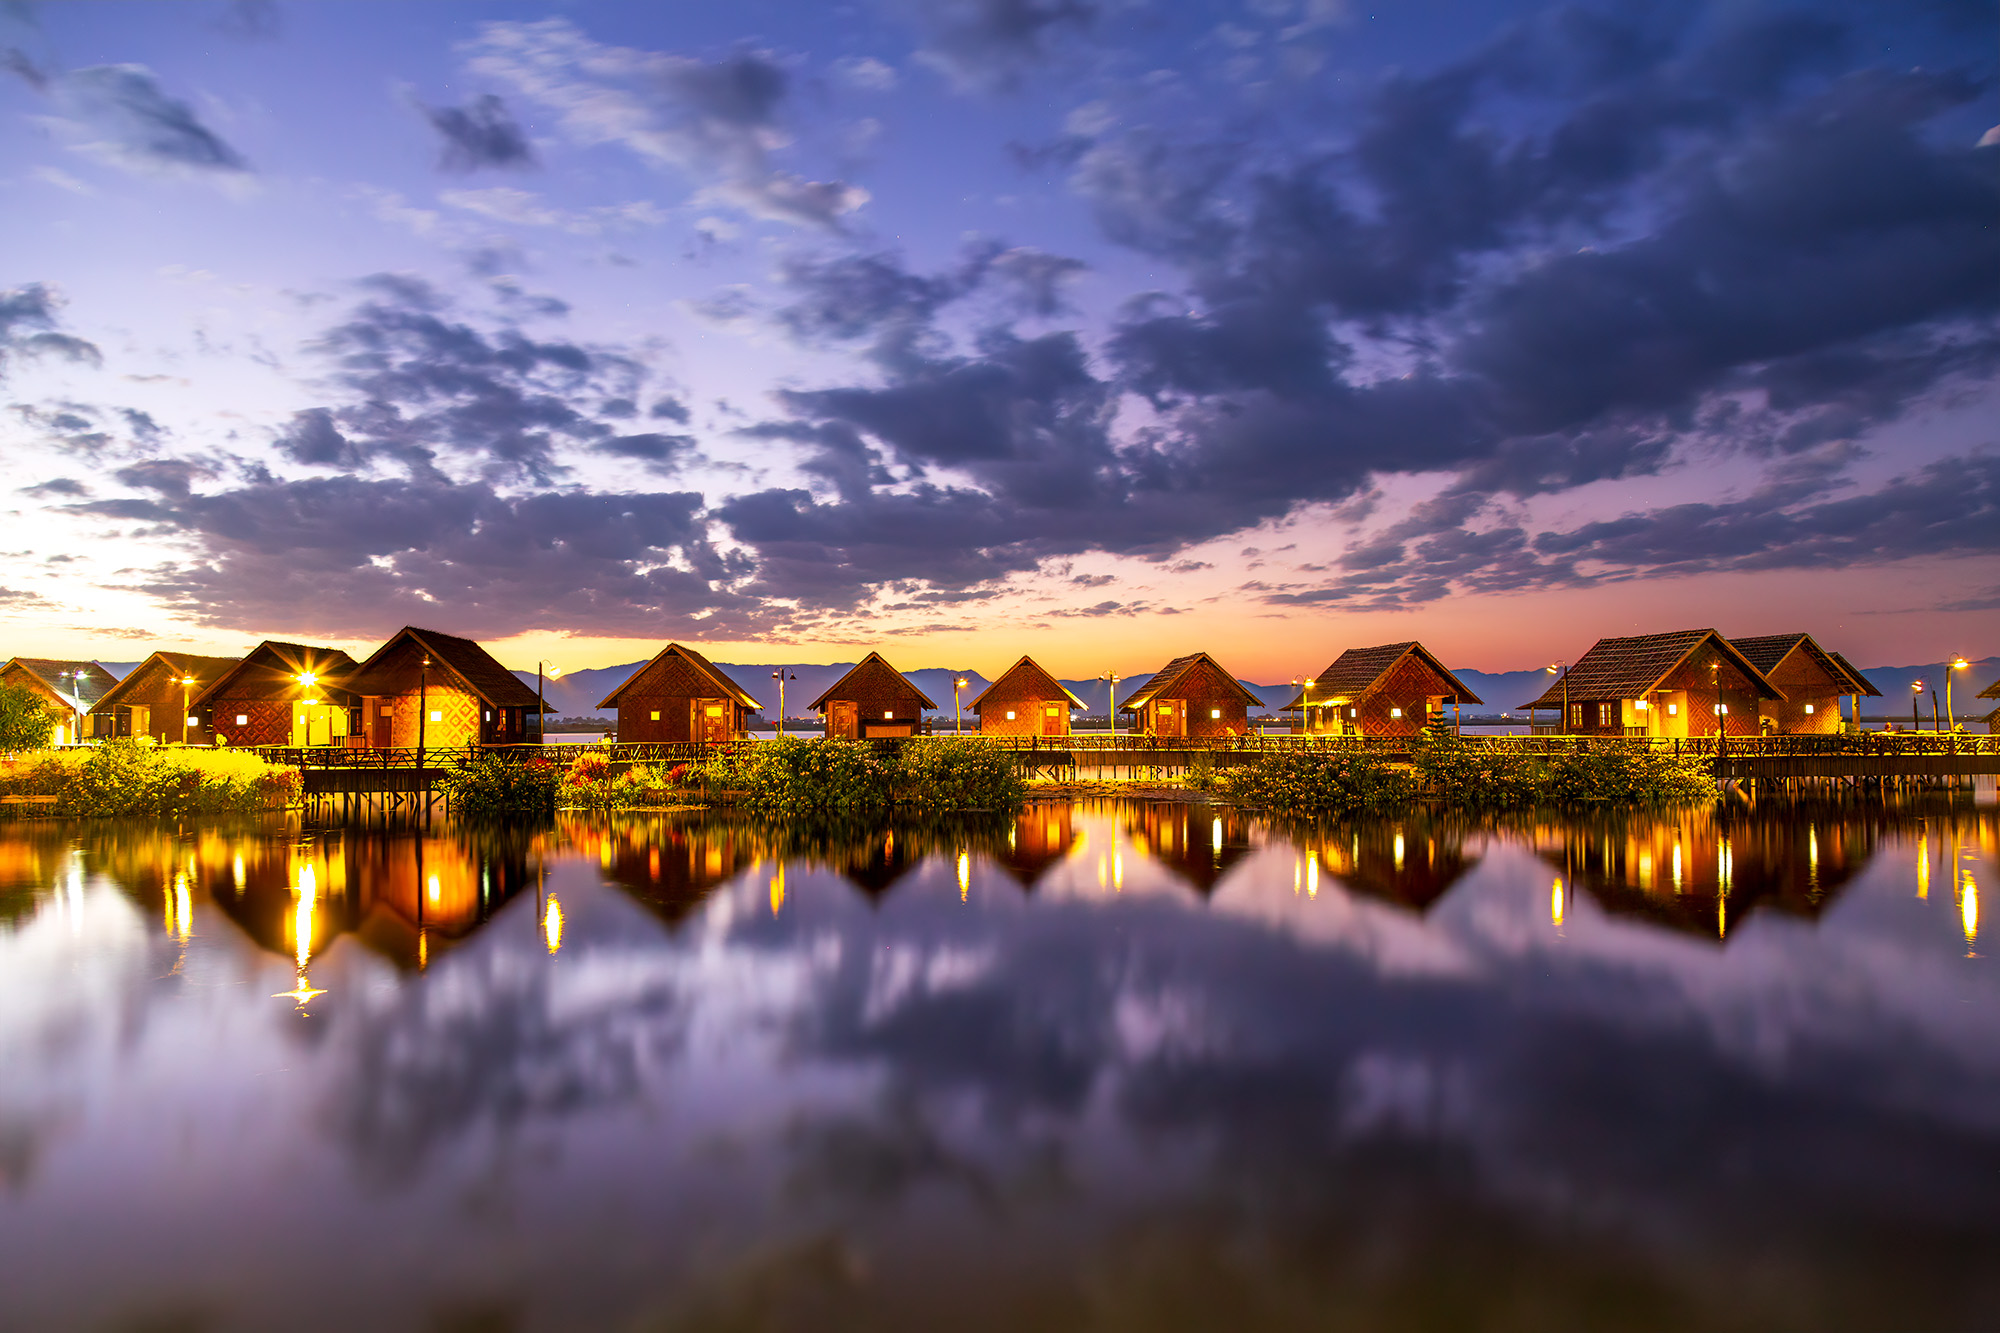 Beneath the vast expanse of a radiant sunset, "Horizon's Embrace" captures the enchanting view from the "Sky Lake Inle Resort...